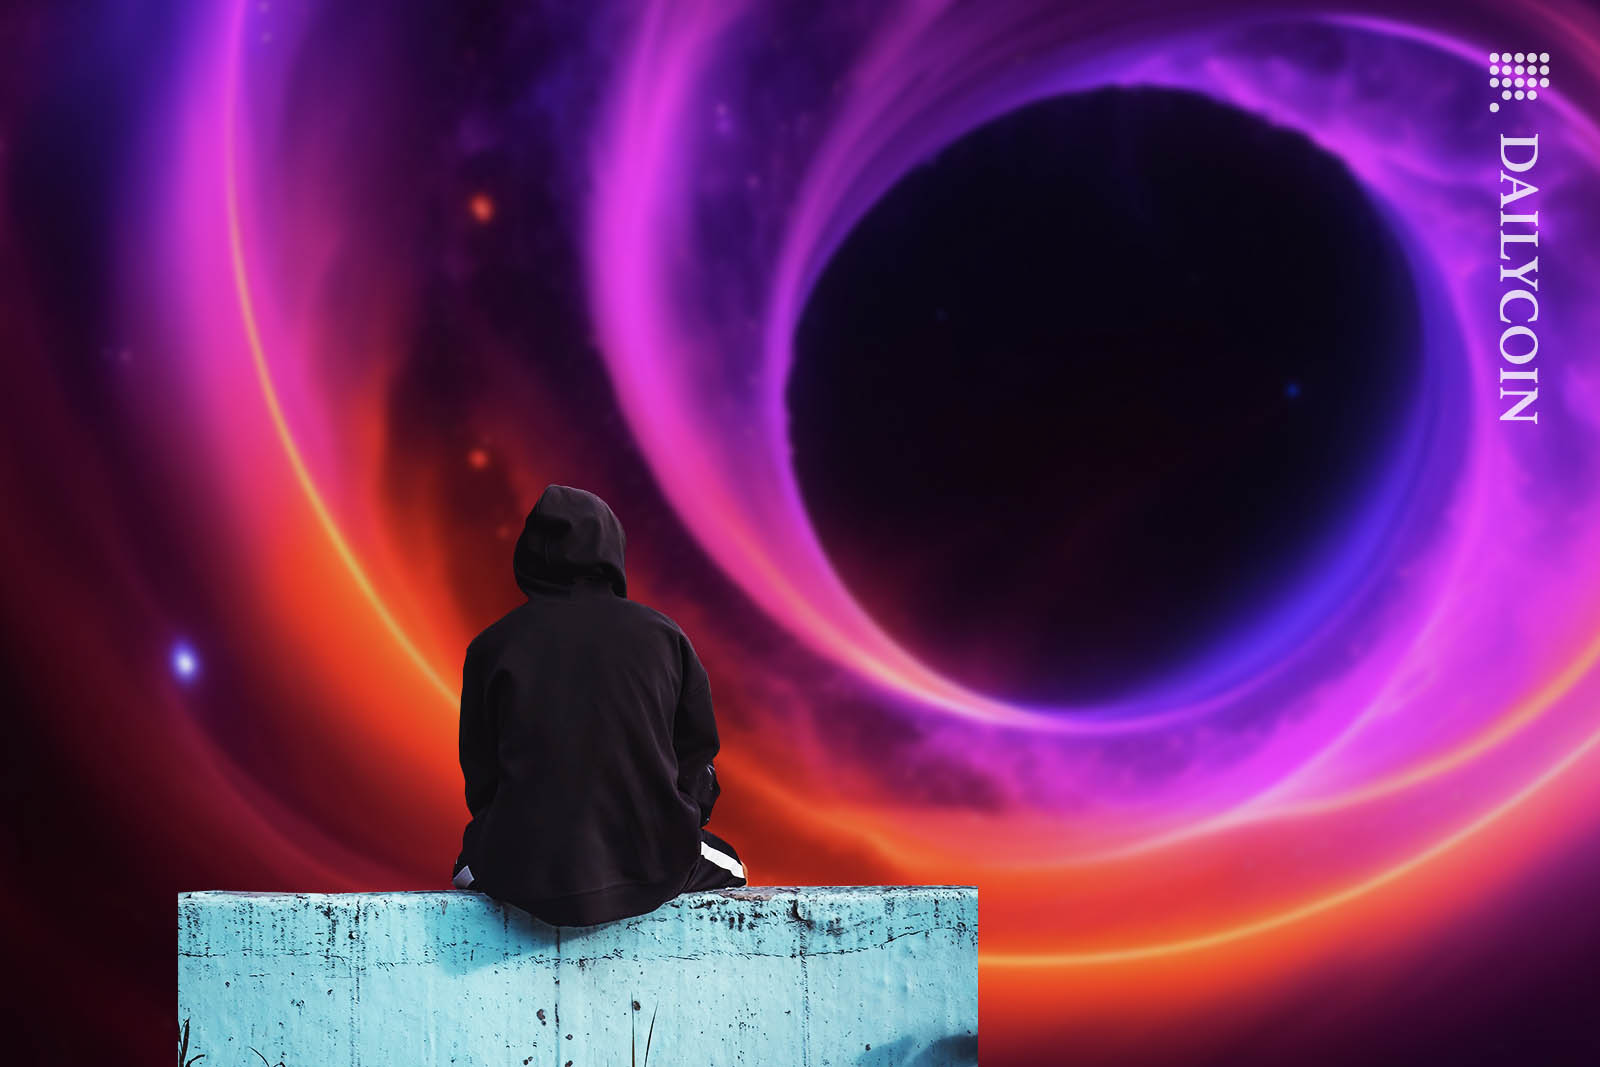 Guy in a black hoodie contemplating infront of a big swirling portal in space.